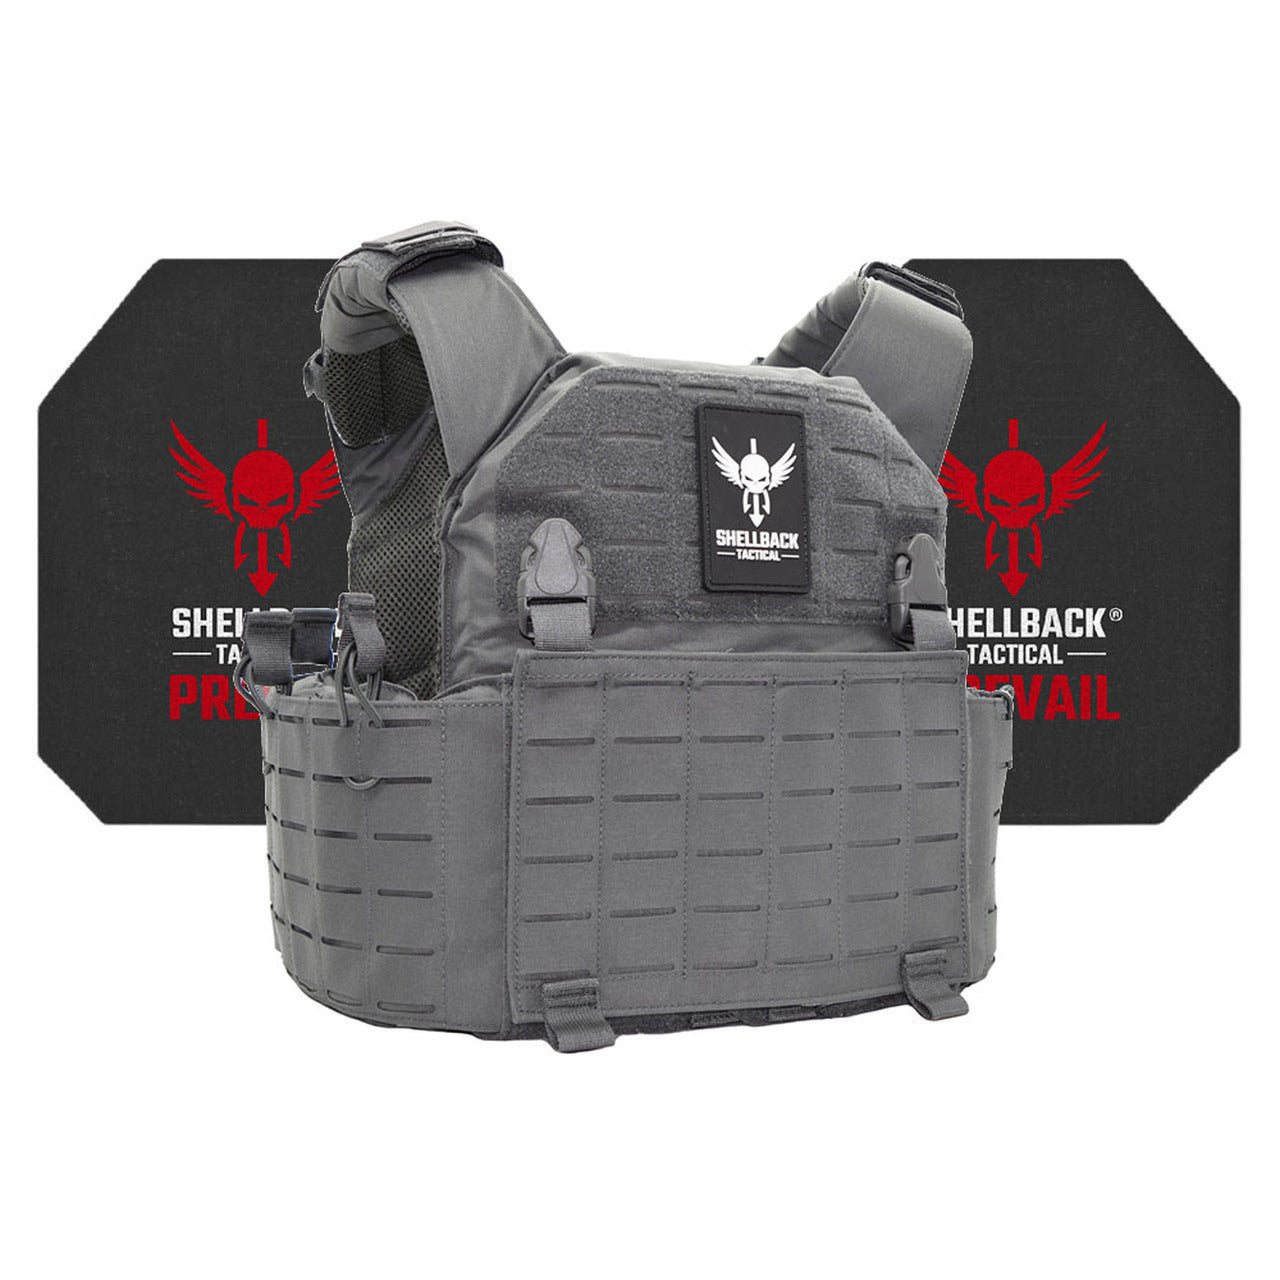 Tactical and Duty Gear for Shooters of All Levels, TUFF Products- Products  that Protect